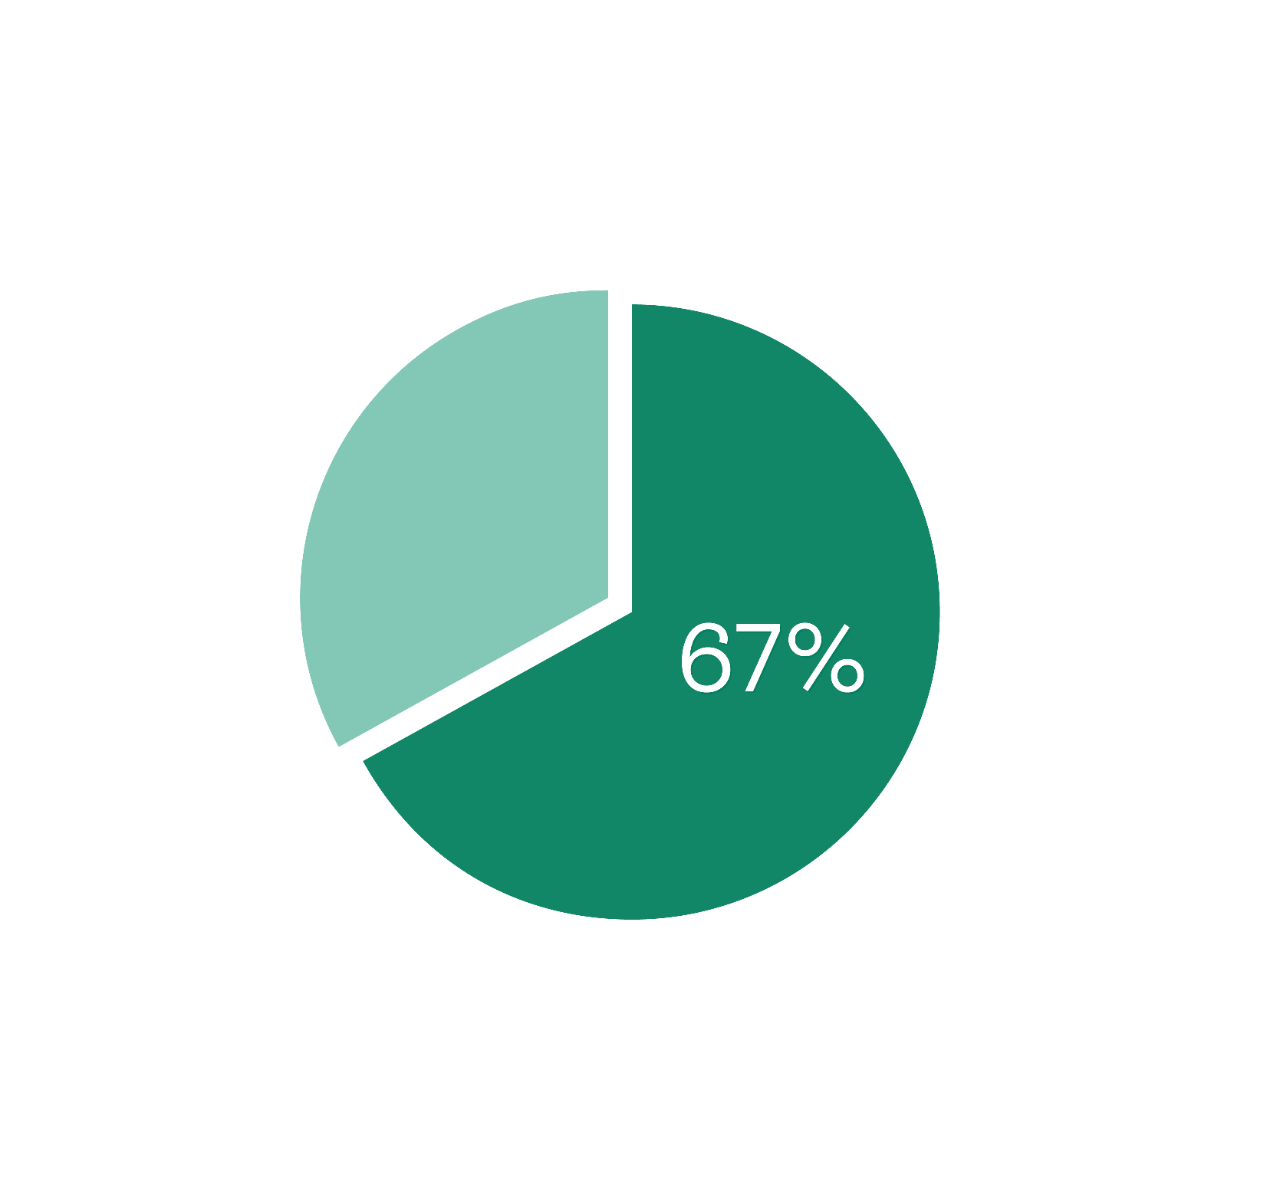 Image shows a pie chart. The left segment is in light green and smaller. The right segment is in dark green and larger, in this segment is text that reads '67%' in white.